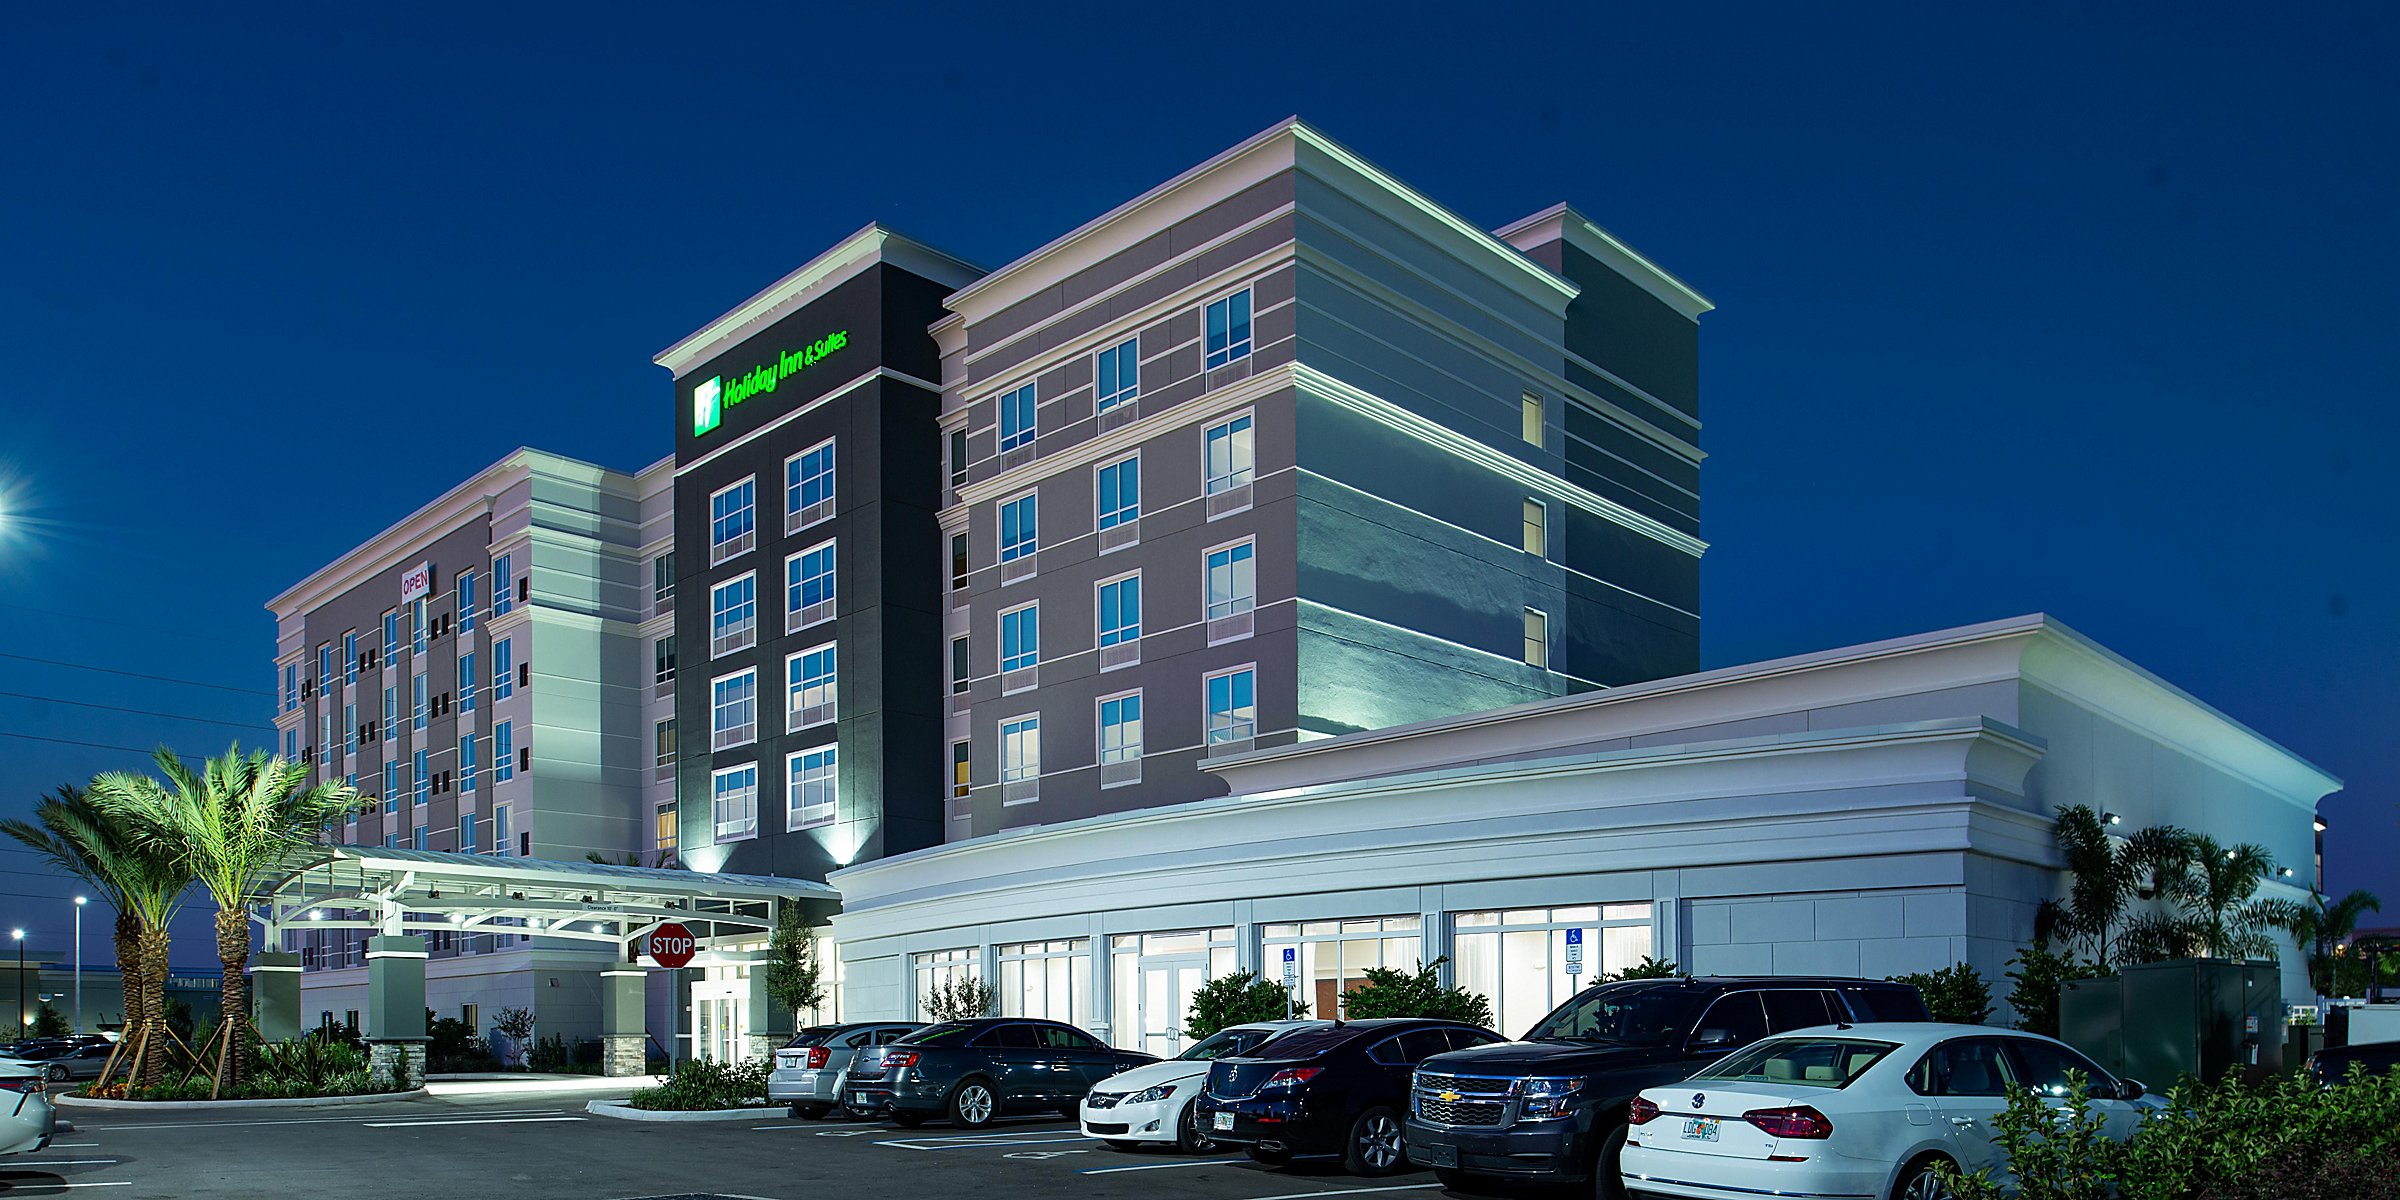 Holiday Inn Hotel And Suites Orlando 6187104297 2x1?wid=2400&hei=1200&qlt=85,0&resMode=sharp2&op Usm=1.75,0.9,2,0&qlt=85,0&resMode=sharp2&op Usm=1.75,0.9,2,0